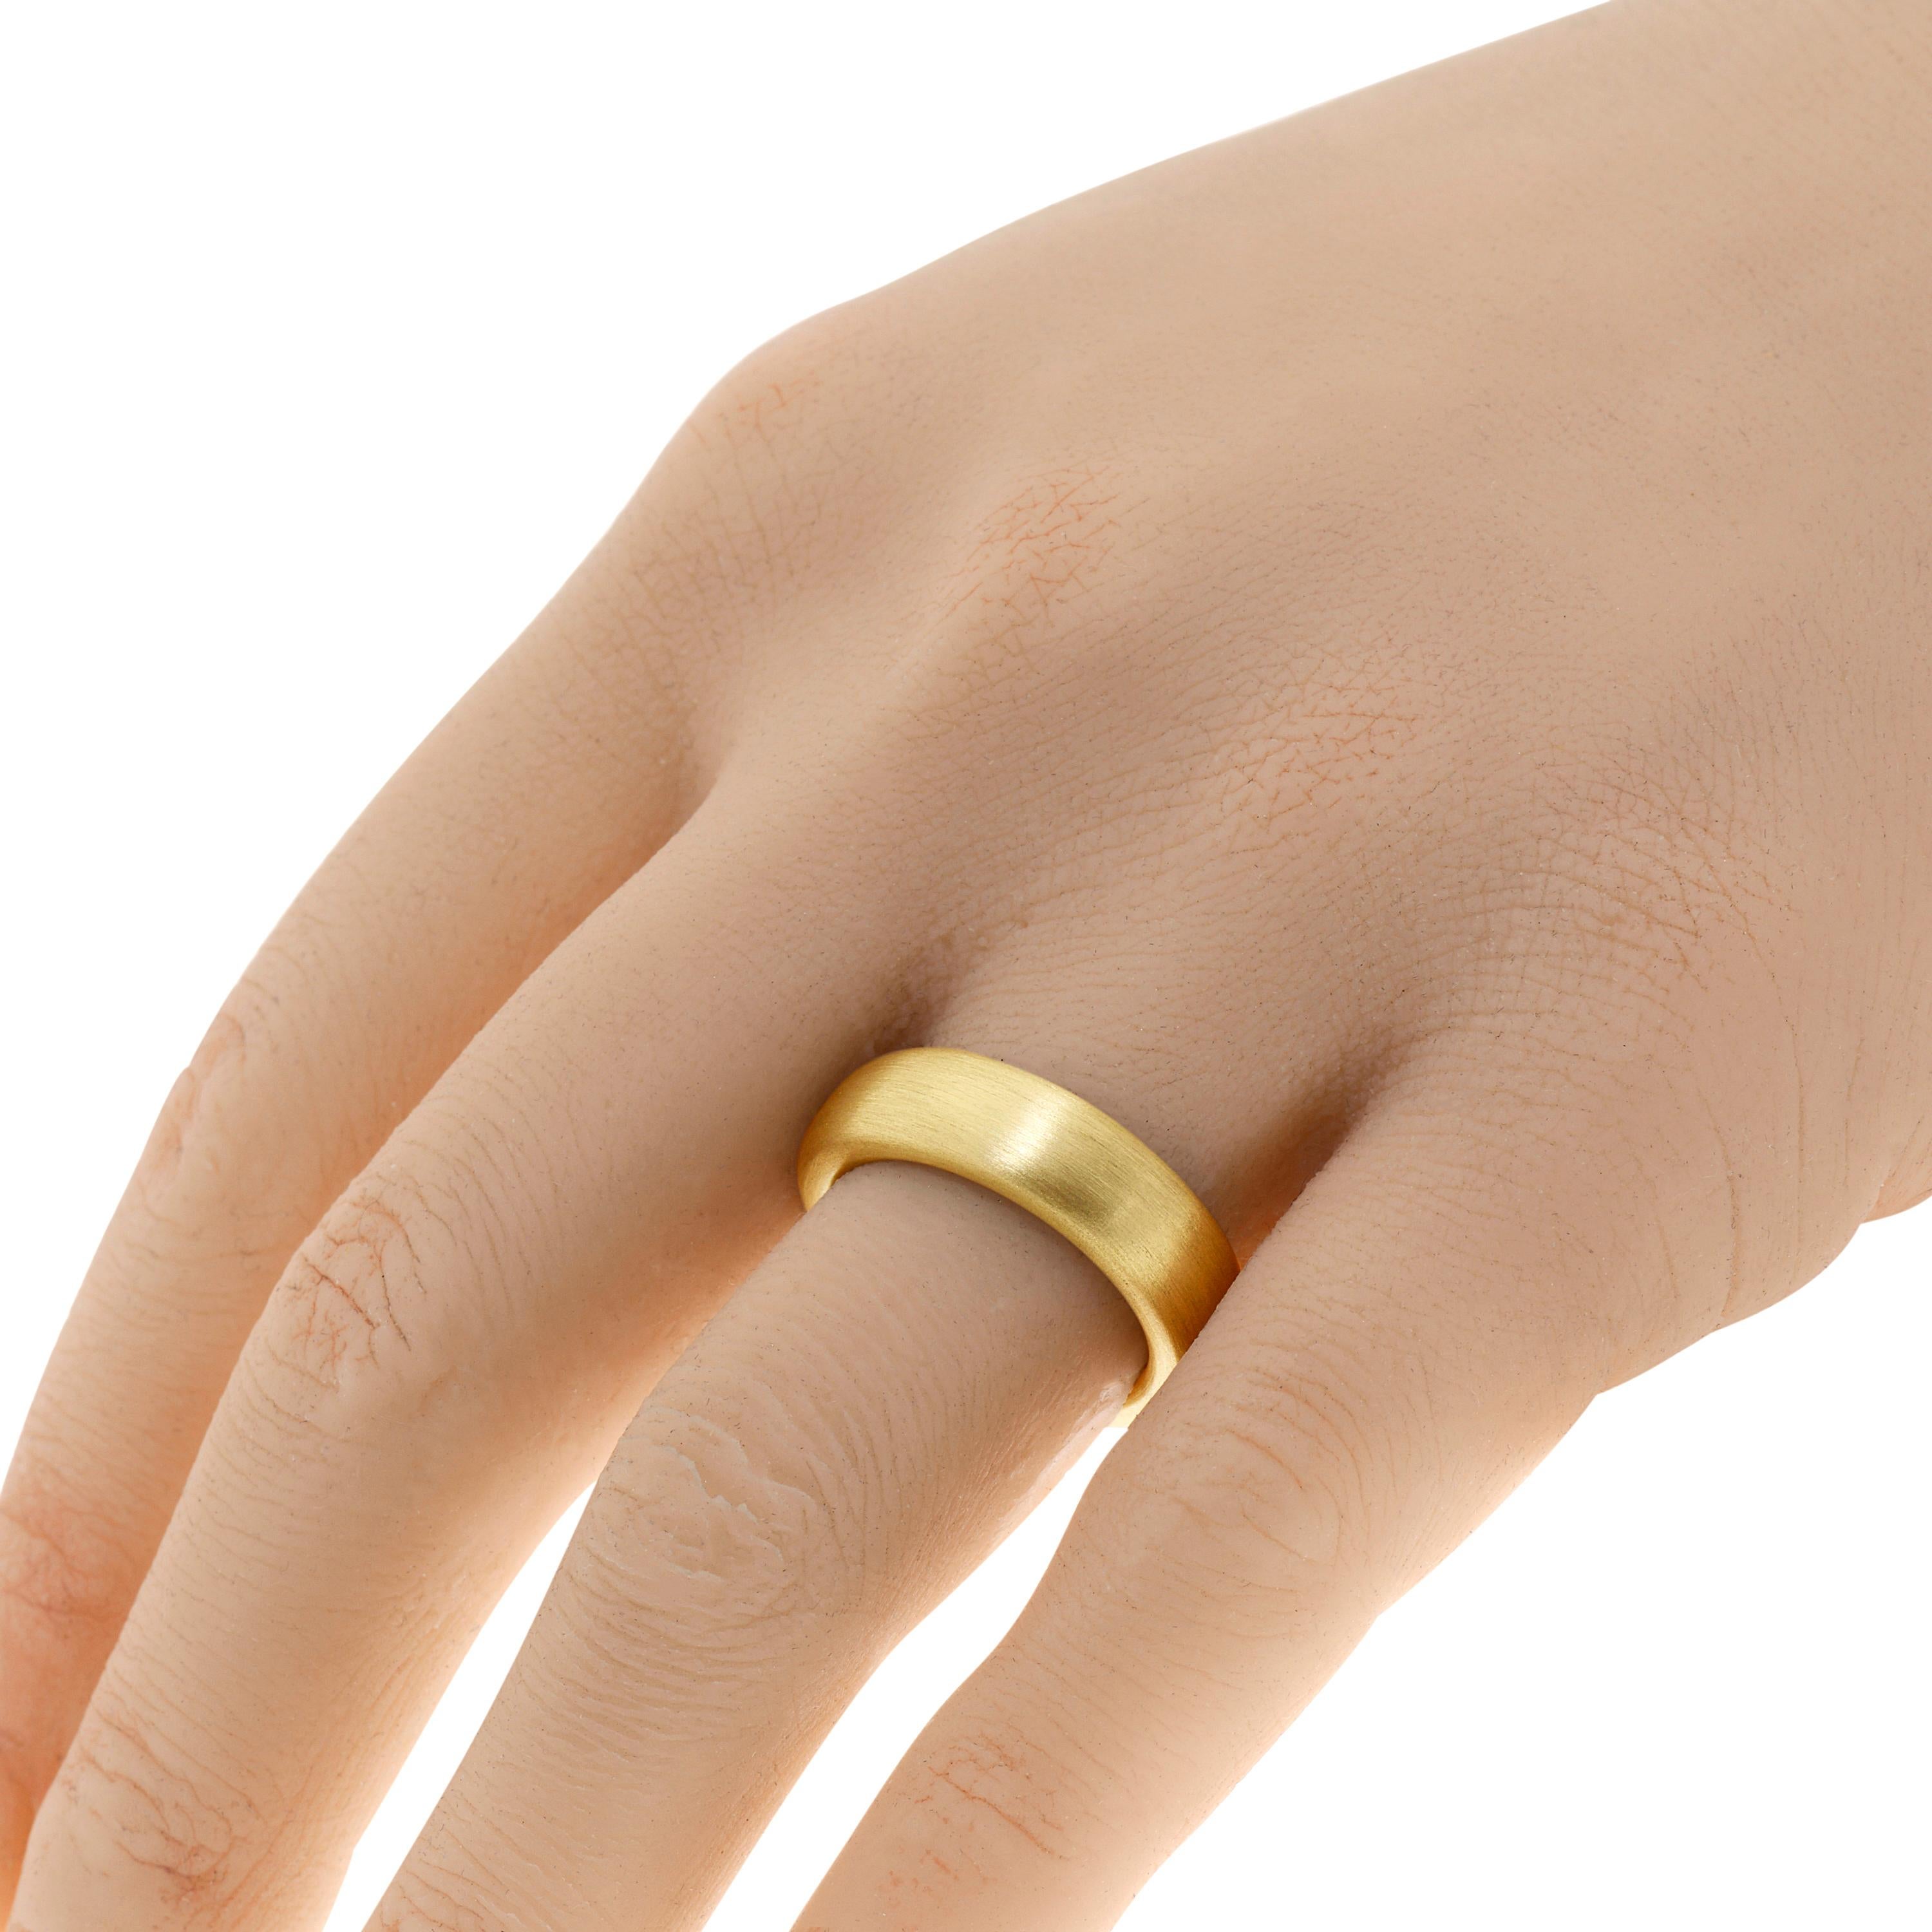 This classic Piero Milano 18K Yellow Gold Band Ring features a luxuriously brushed Yellow Gold band. The ring size is 6.75 (53.8). The Band Width is 6.3mm. The Weight is 5.8g.
